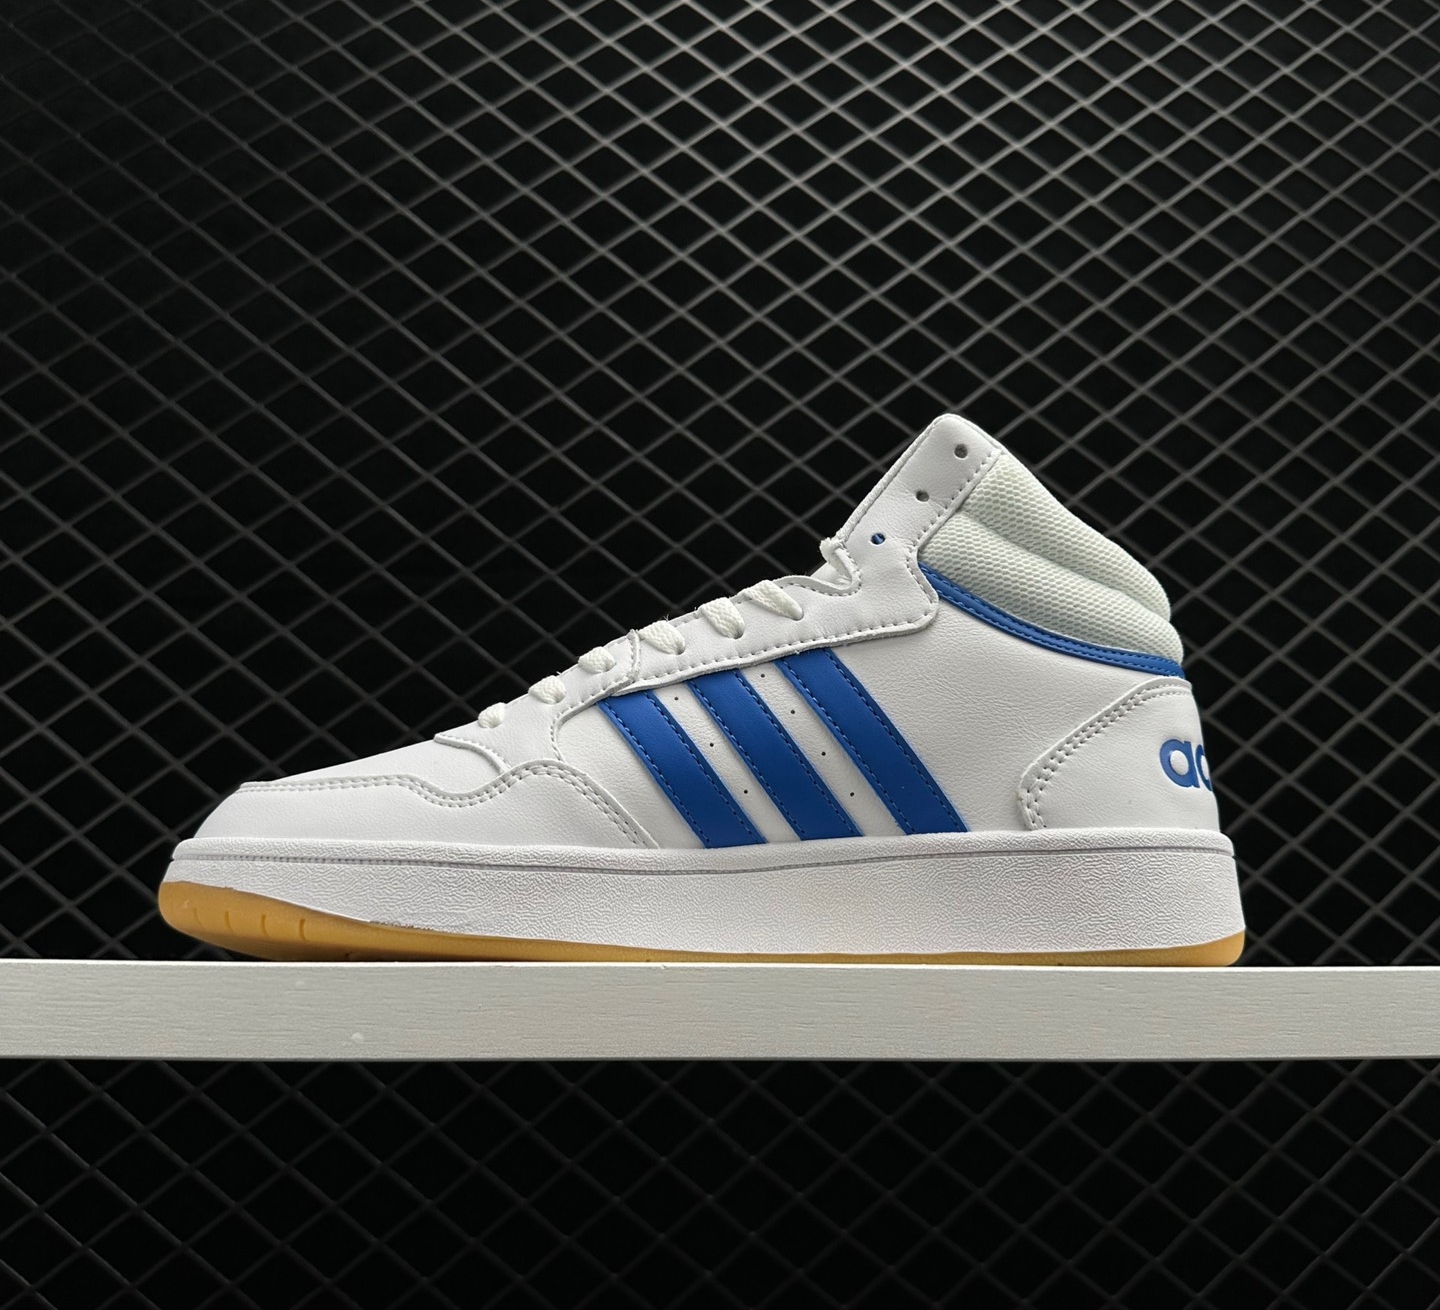 Adidas Hoops 3.0 Mid: White Royal Blue Sneakers - GW3021